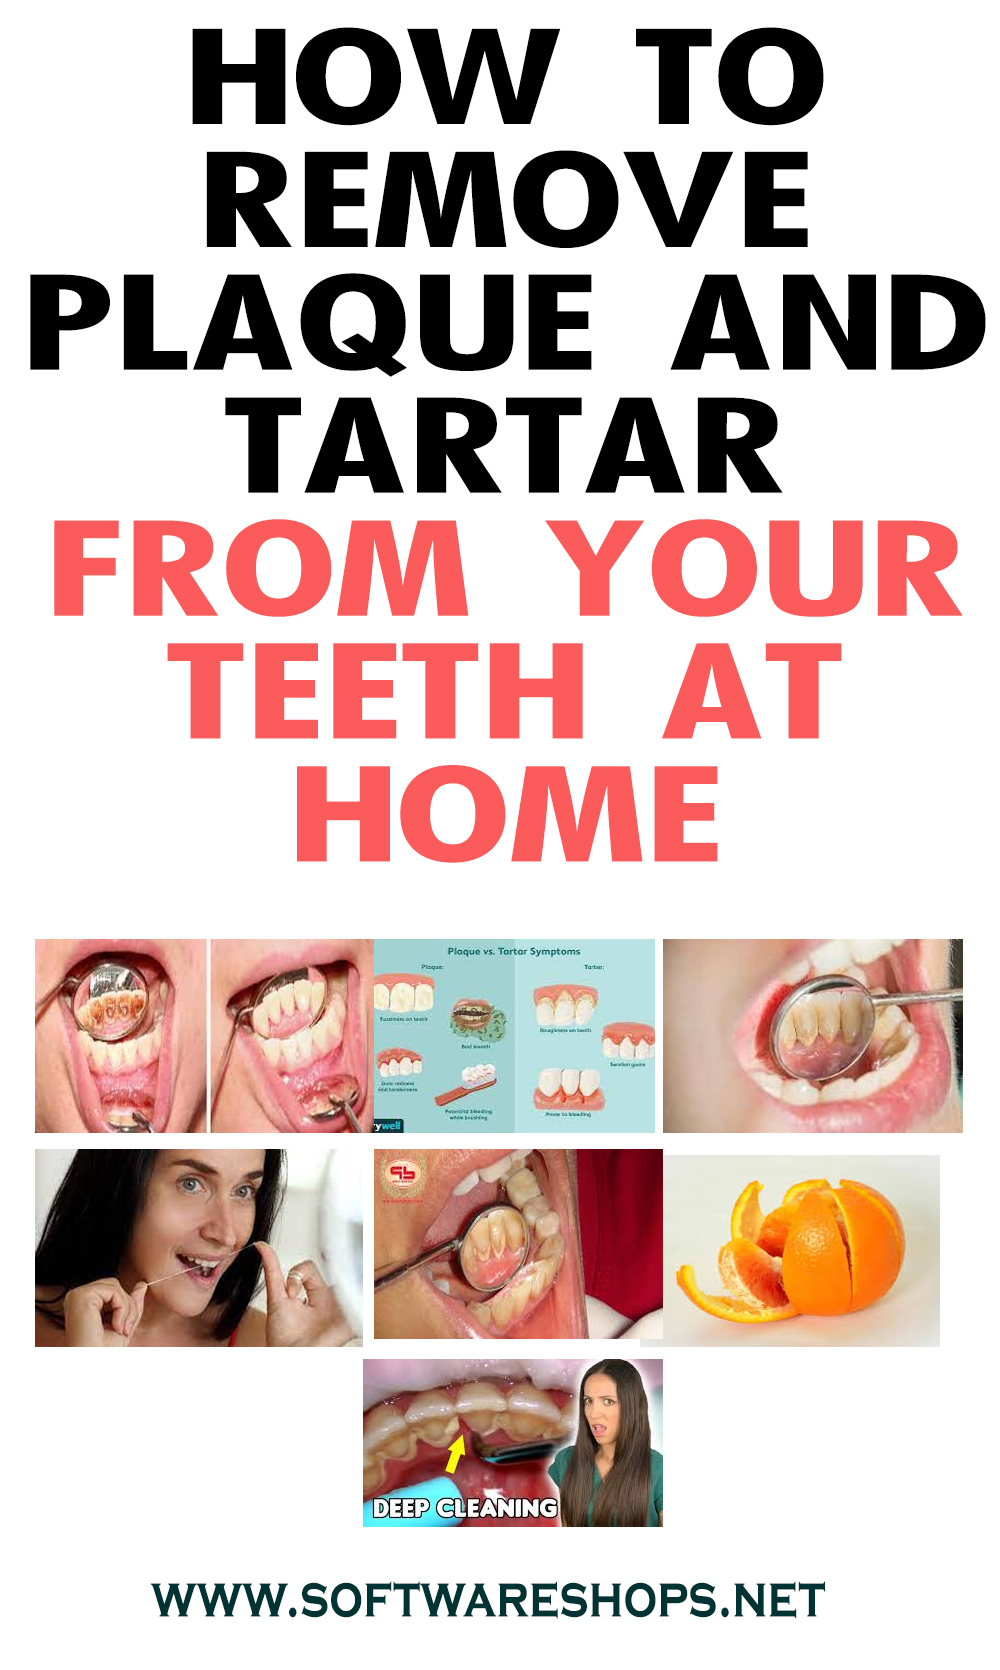 HOW TO REMOVE PLAQUE AND TARTAR FROM YOUR TEETH AT HOME